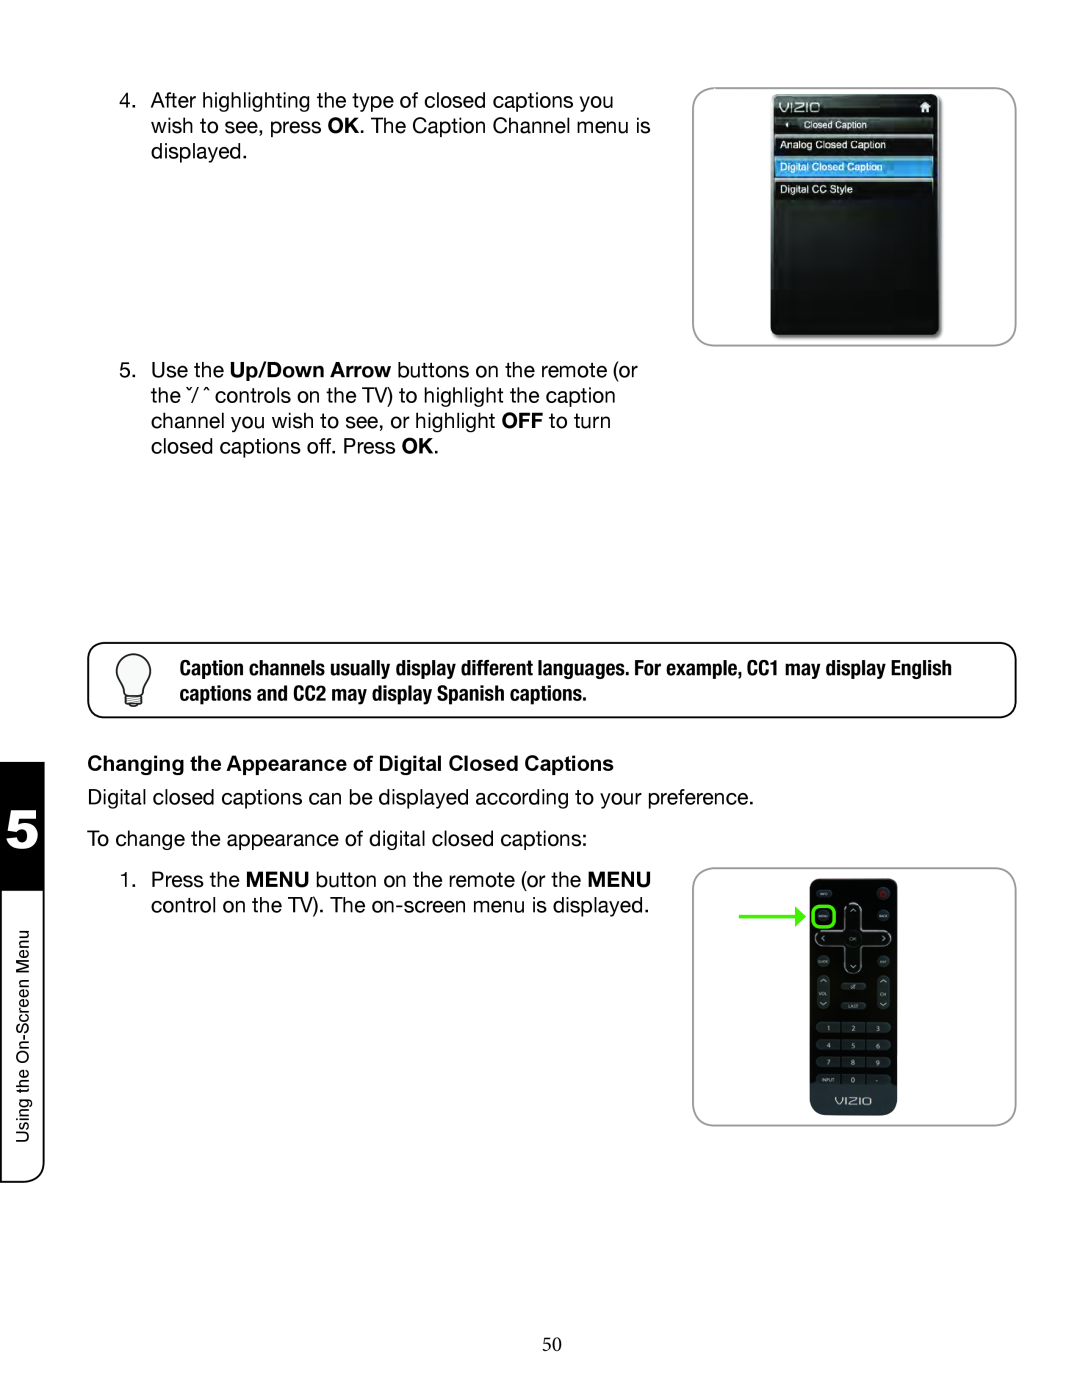 Zanussi VMB070 manual Changing the Appearance of Digital Closed Captions 